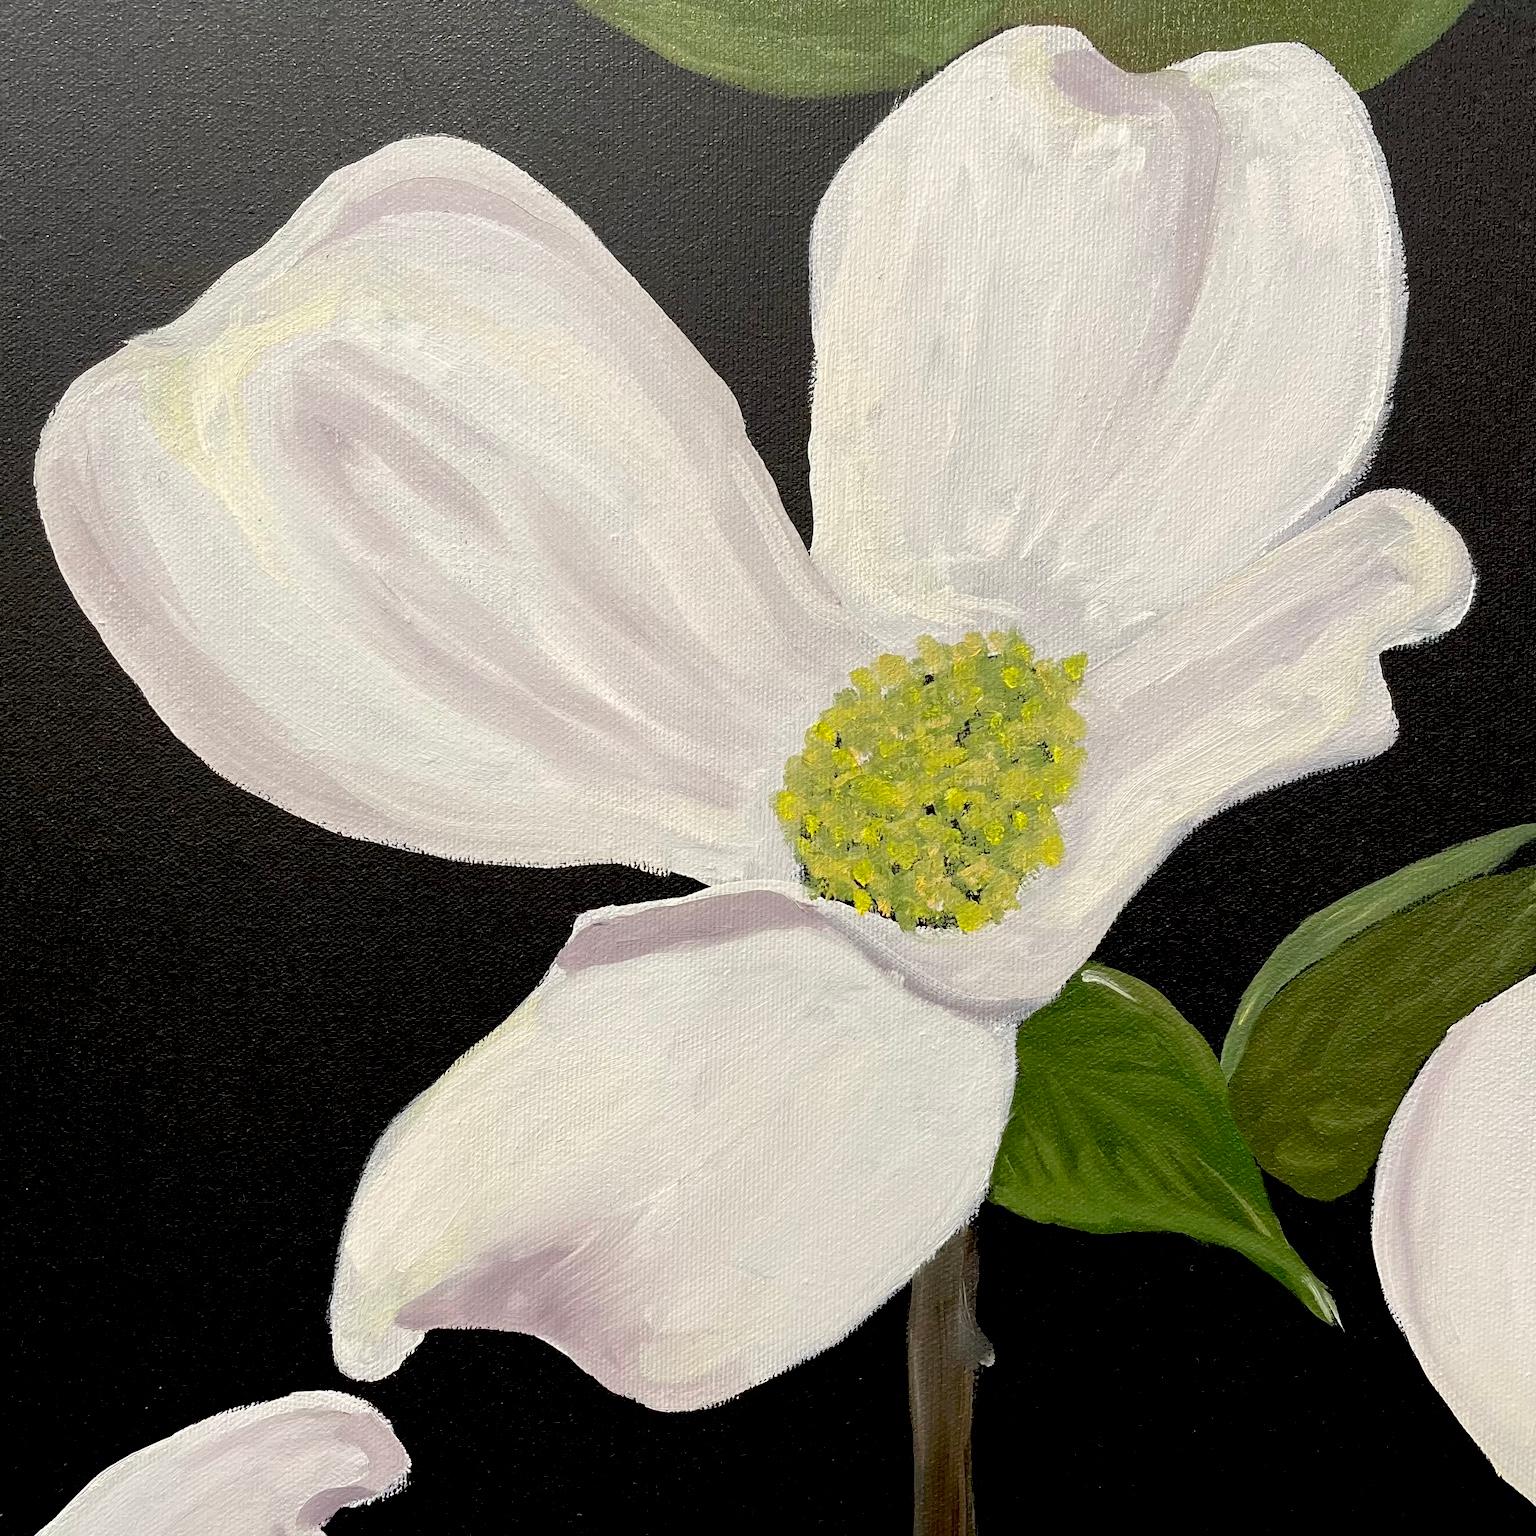 White Flowers and Green Leaves against a Black Background. Title - Wild Dogwood - American Realist Painting by Ken Miller